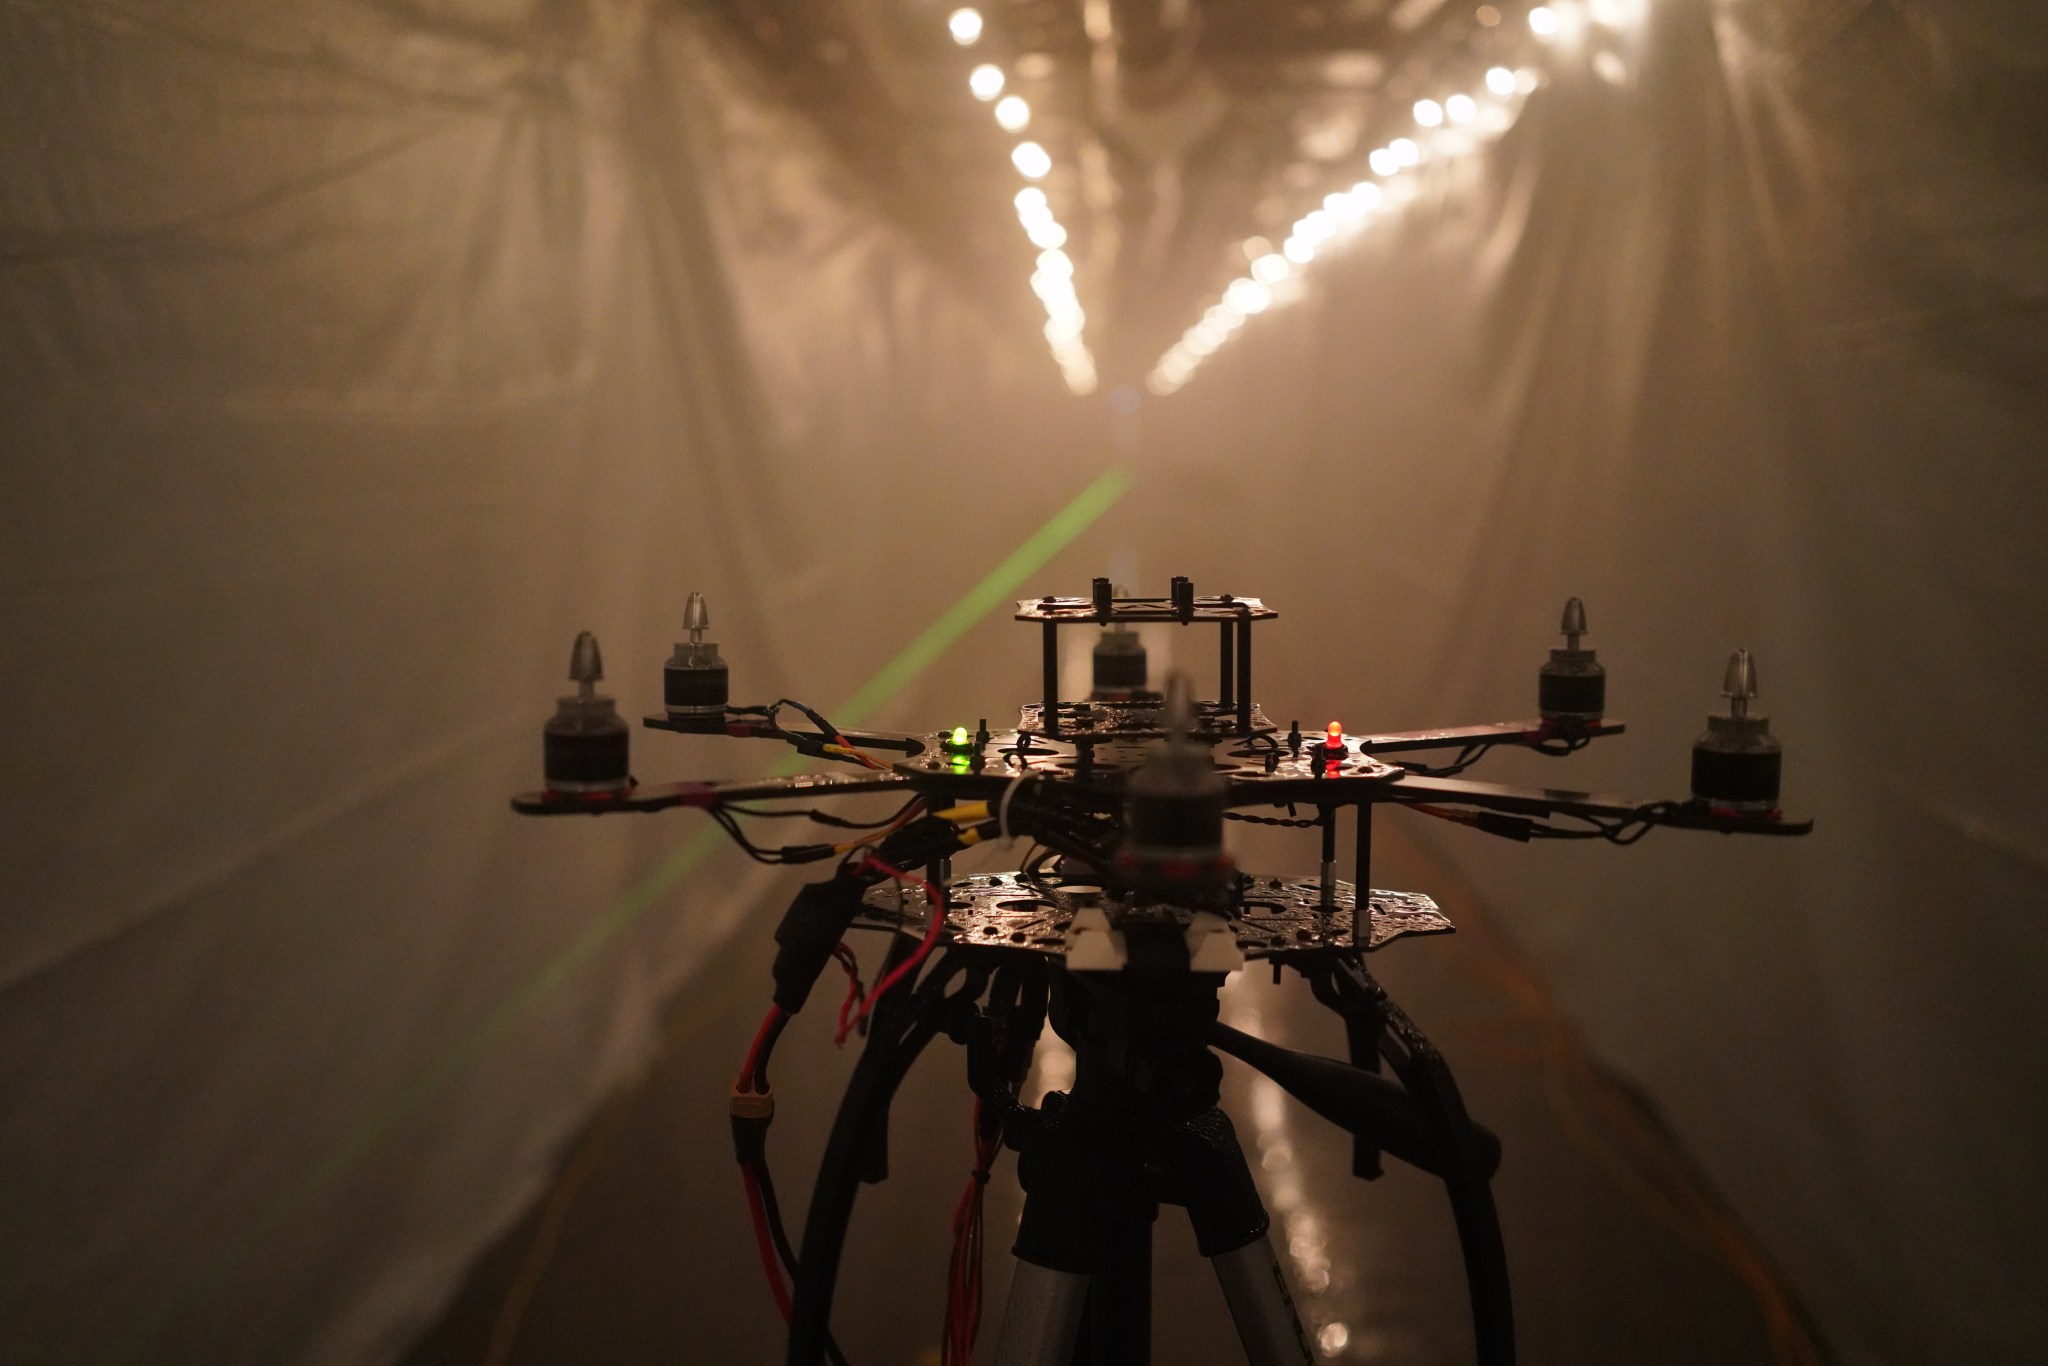 The frame of a drone sits at one end of a long passage filled with fog. Plastic sheeting covers the walls and two strings of lights line the ceiling.